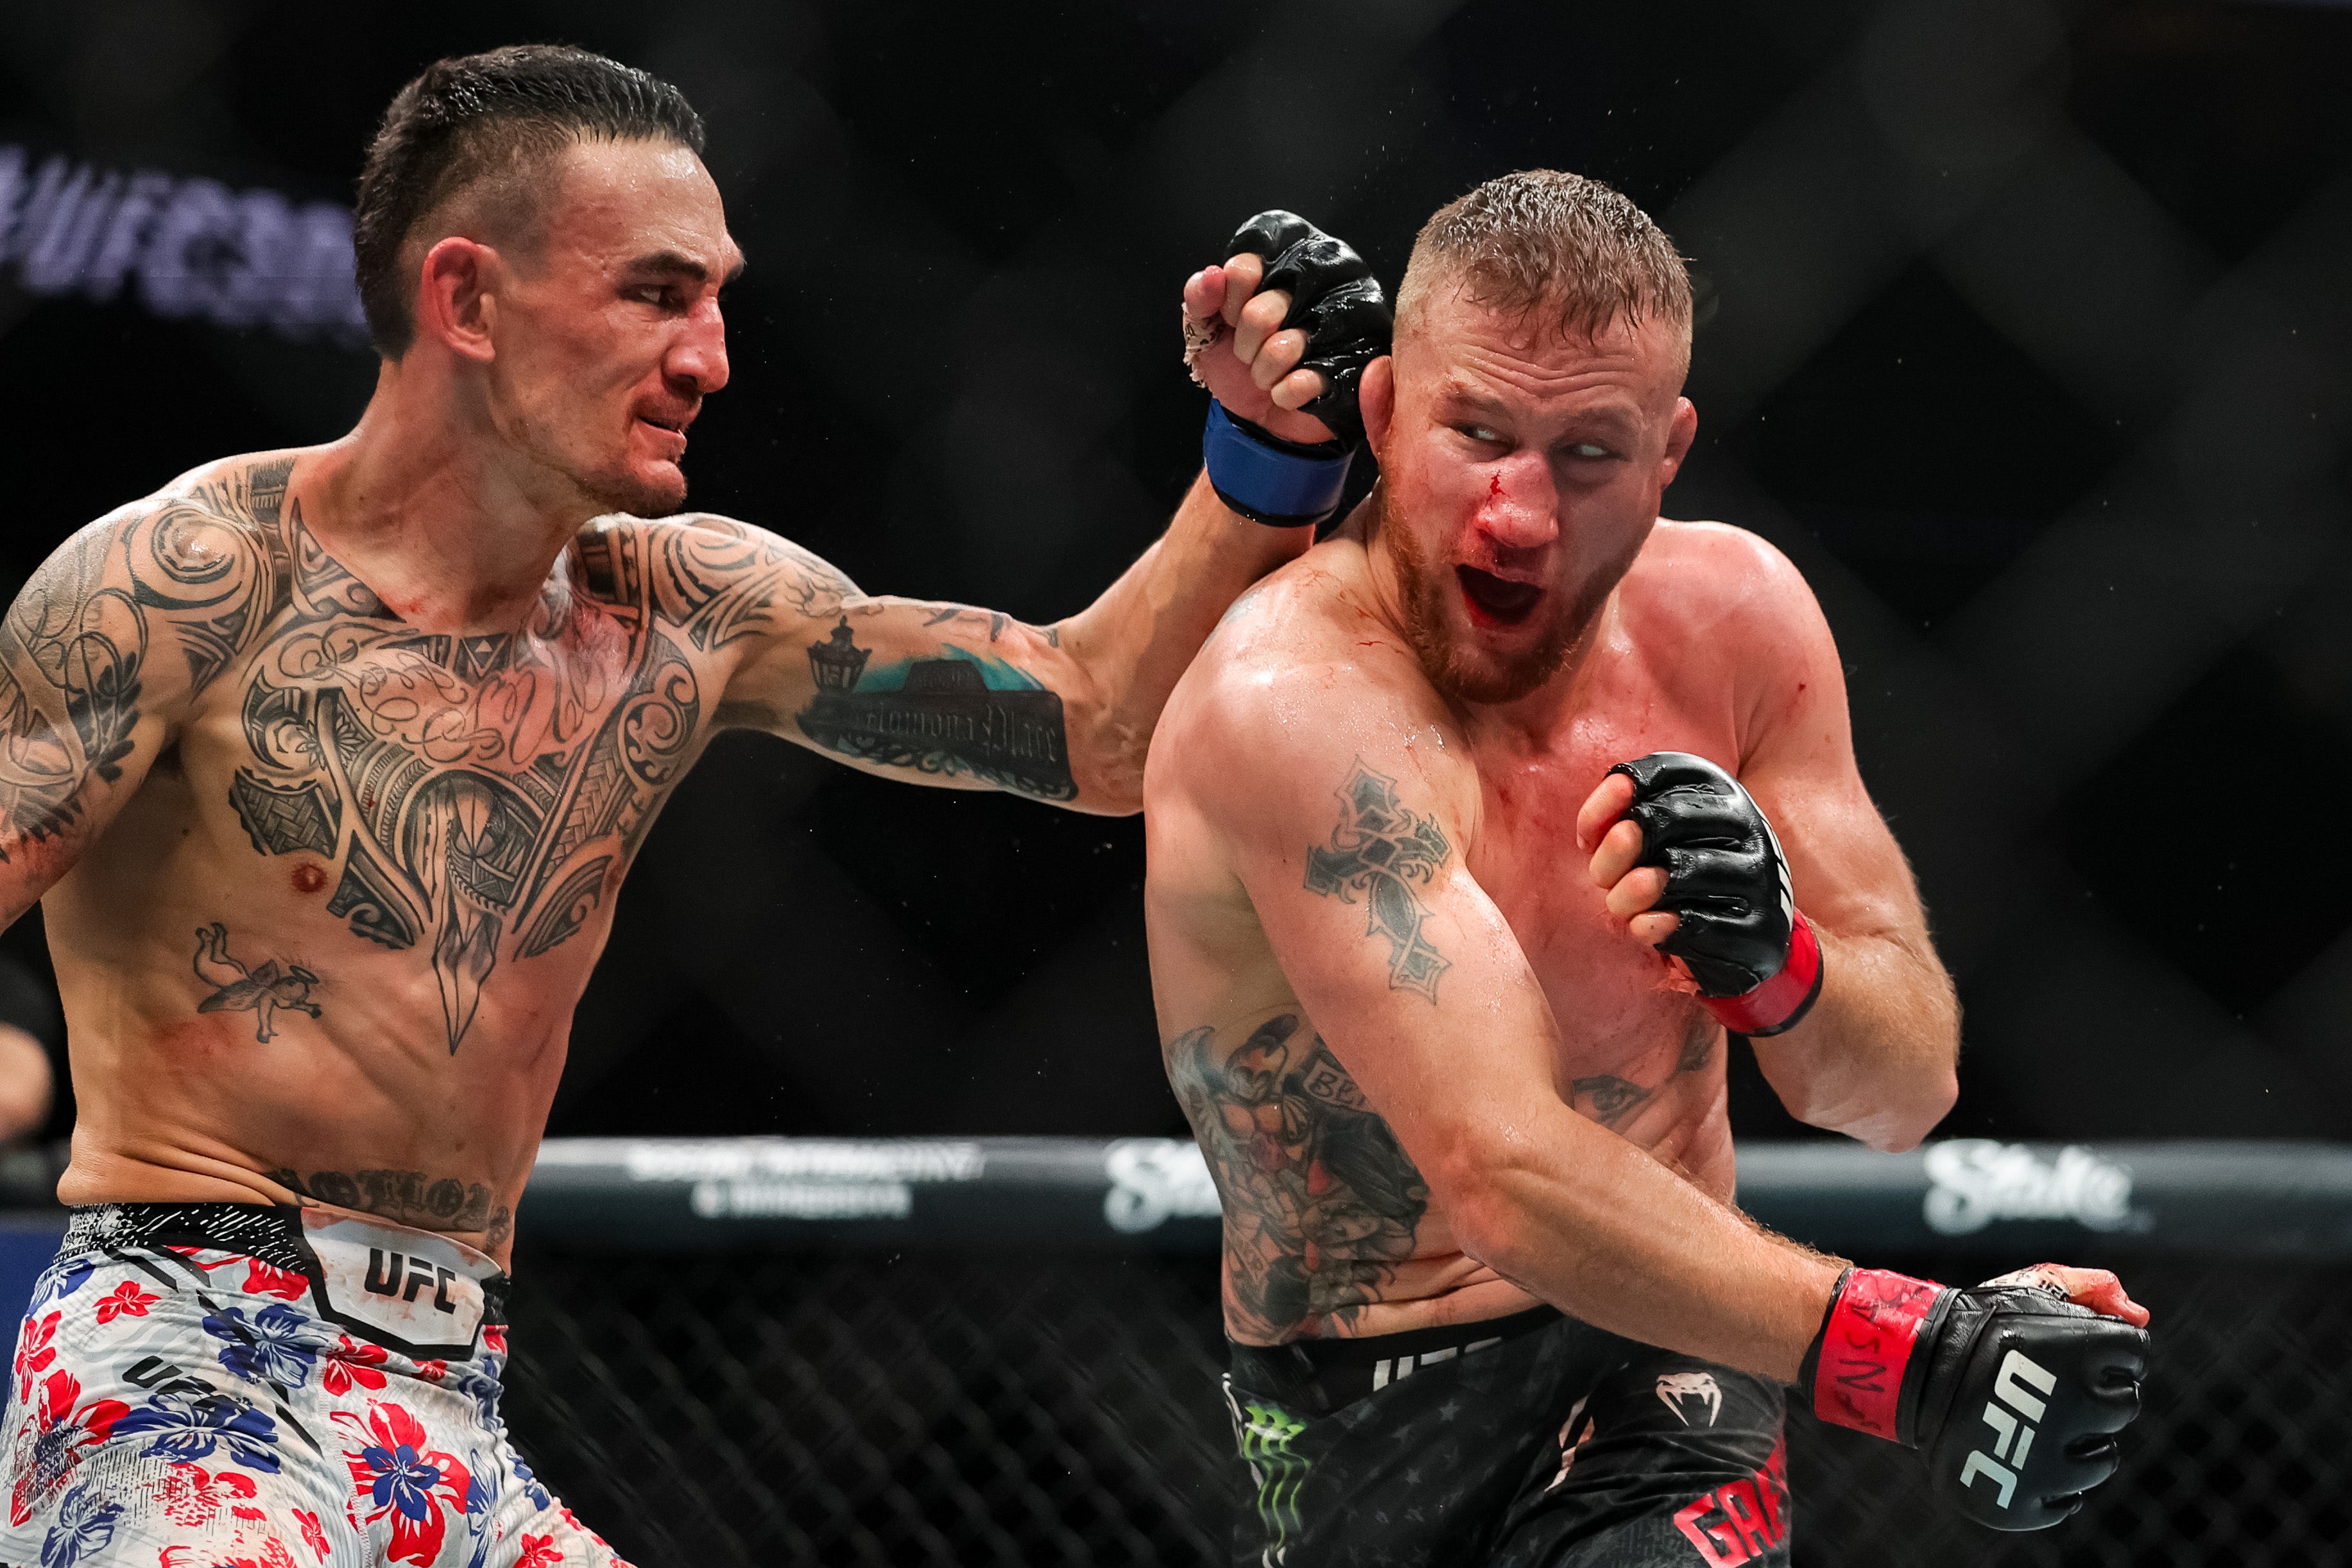 Holloway (left) knocked out Gaethje in the final second of their five-round fight